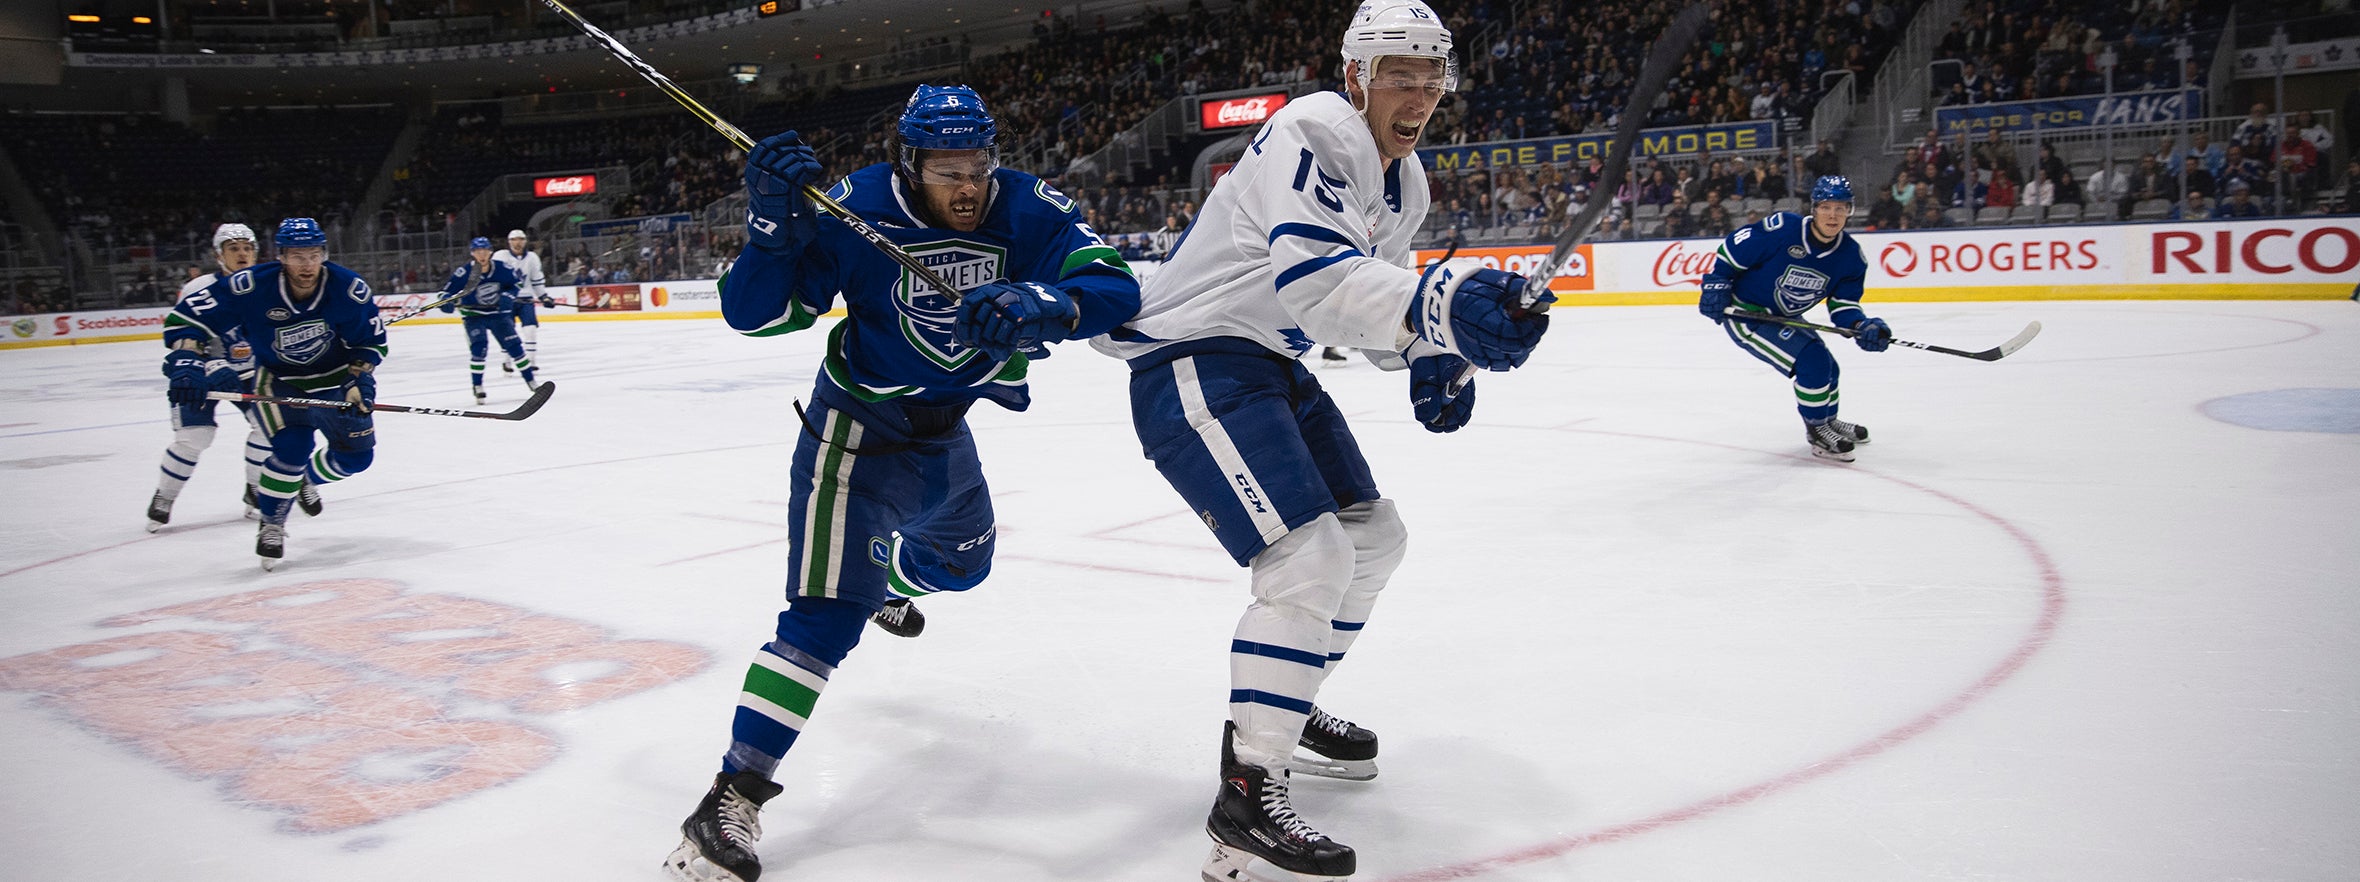 COMETS OFFENSE COMPLETES WEEKEND SWEEP OF TORONTO